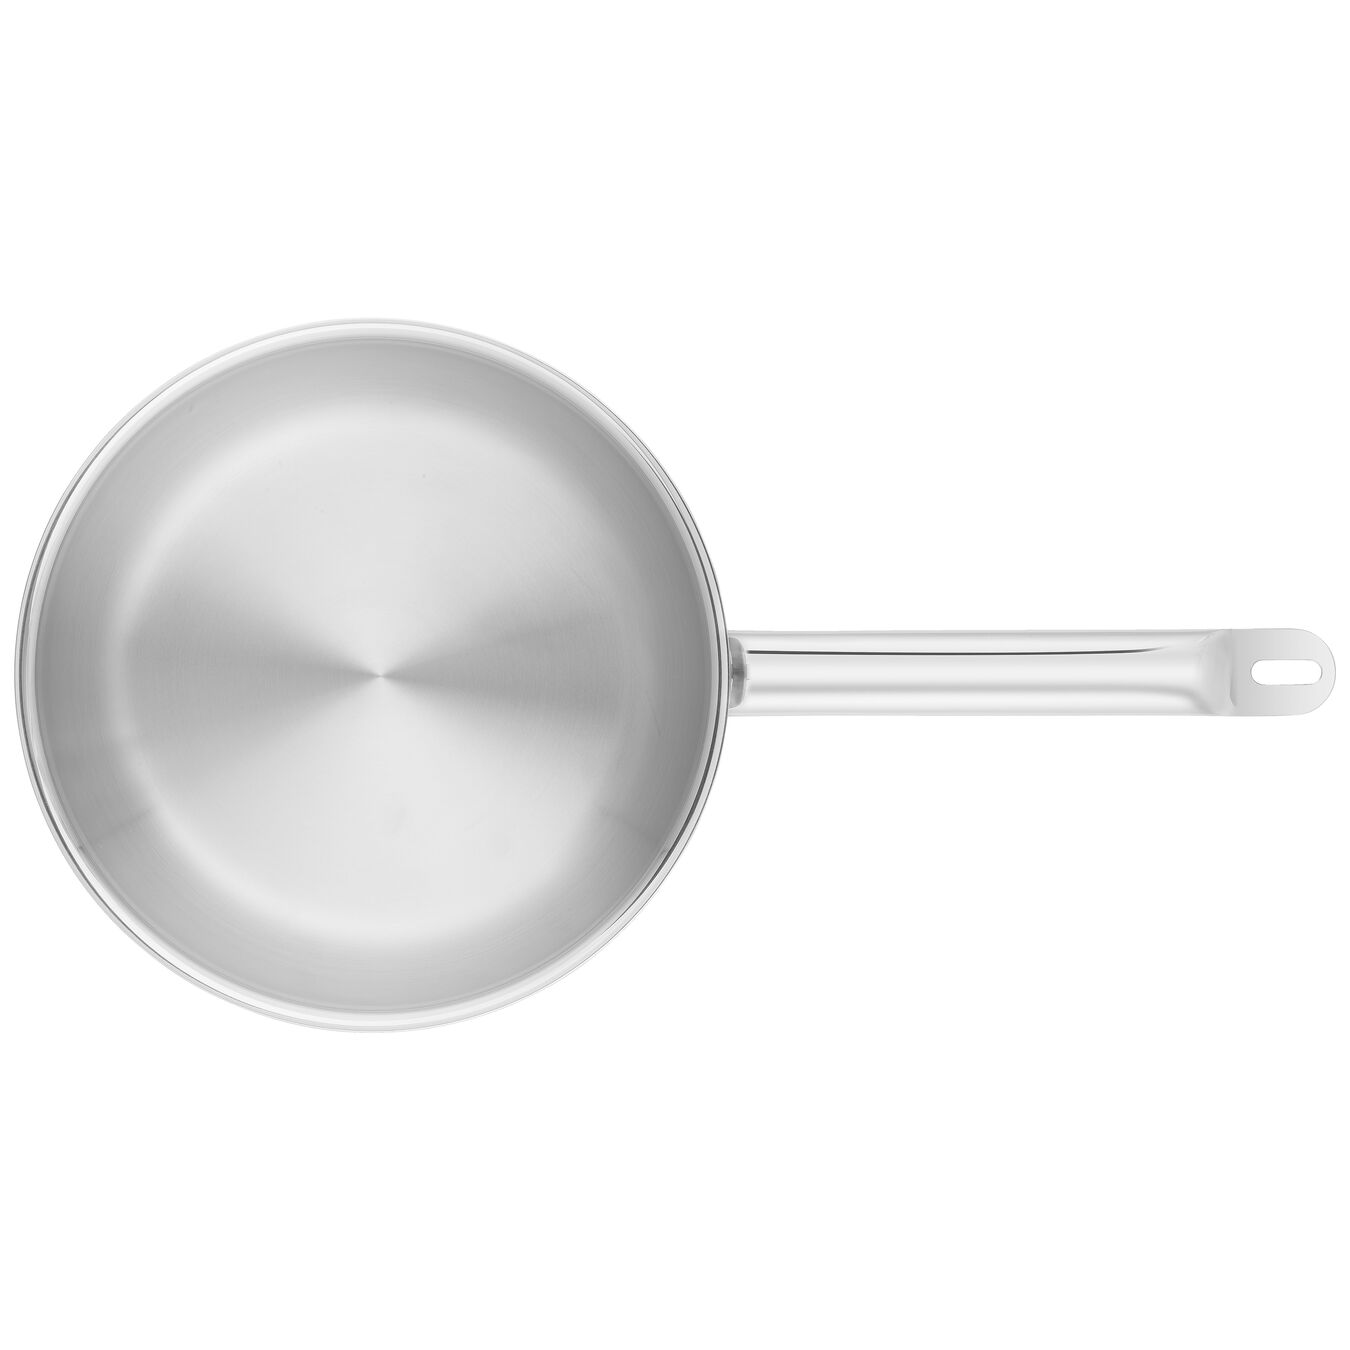 28 cm / 11 inch 18/10 Stainless Steel Frying pan,,large 4